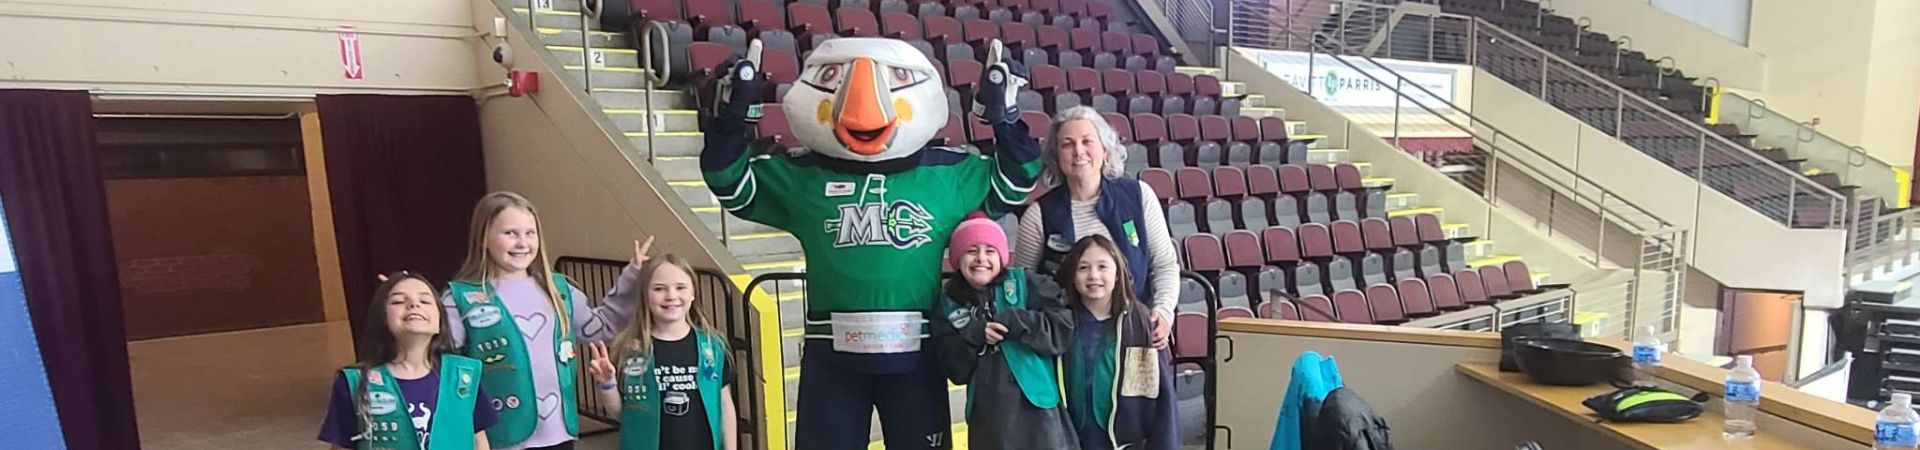  Girl Scouts with their troop leader and Beacon, the Maine Mariners mascot 